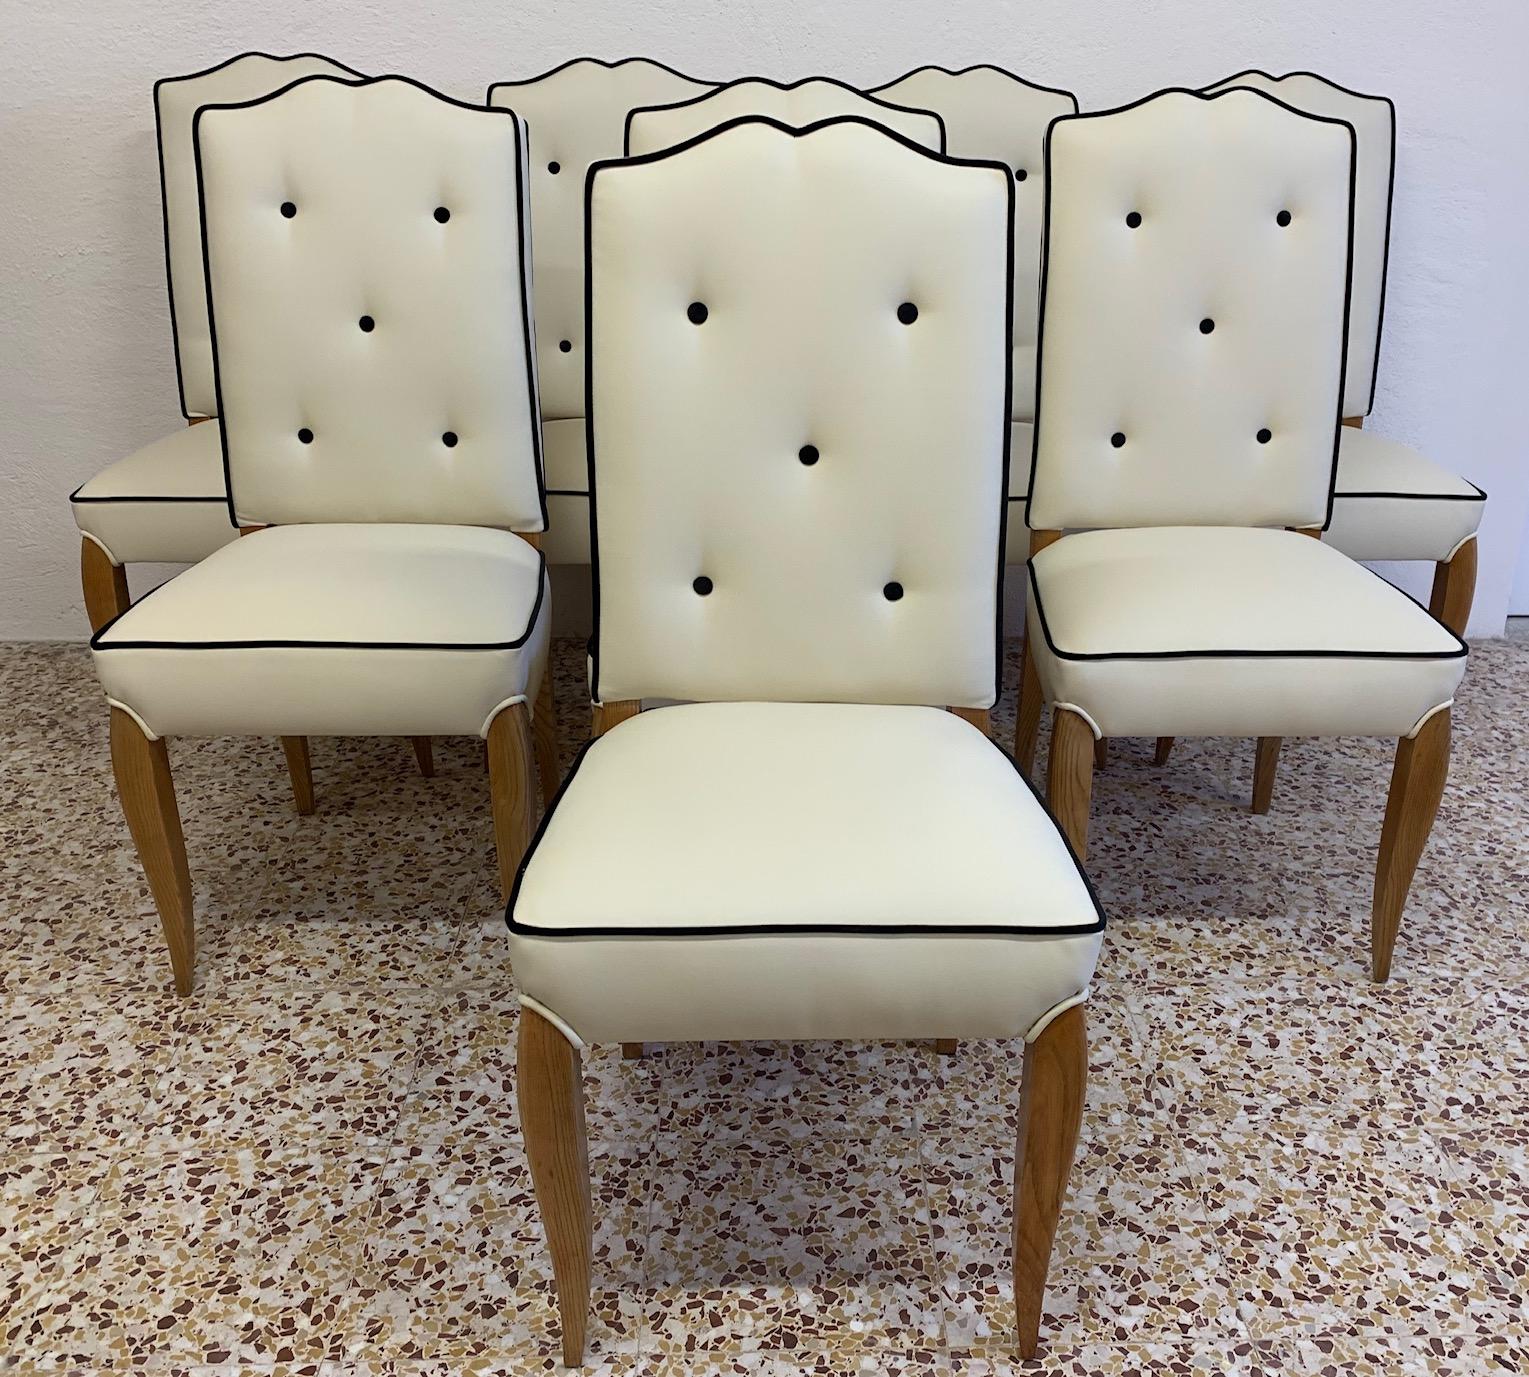 This set of 8 Art Deco chairs were produced in France in the 1930s.
The chairs have been upholstered in precious ivory leatherette while the edges and buttons in black velvet.
The wooden part is in solid Durmast.